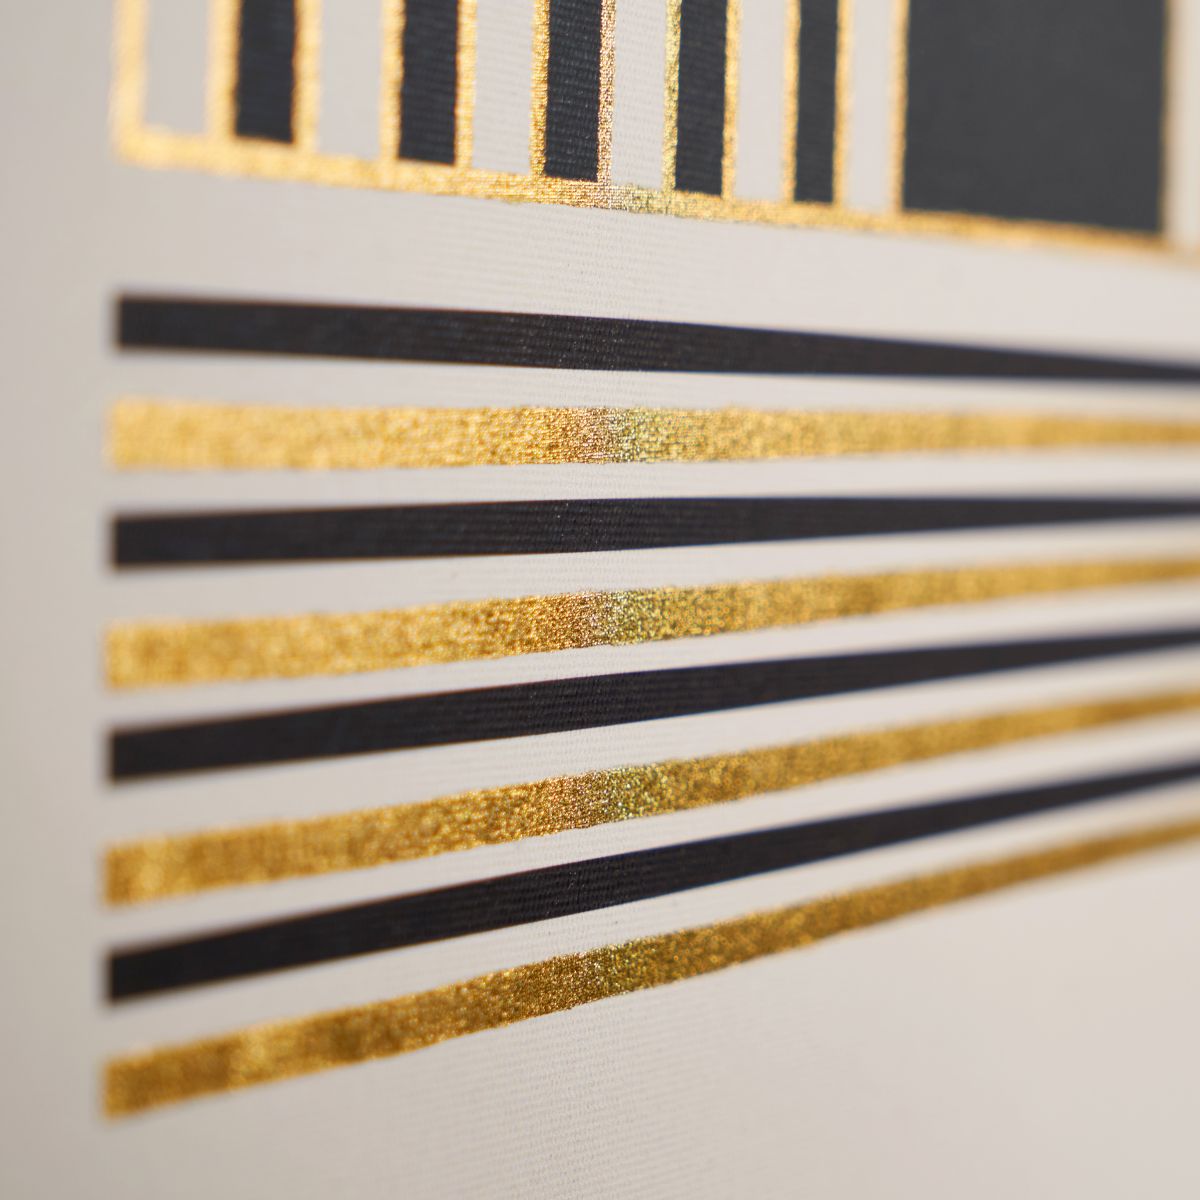 Art Deco Print with Linear Gold Detail and Black Frame